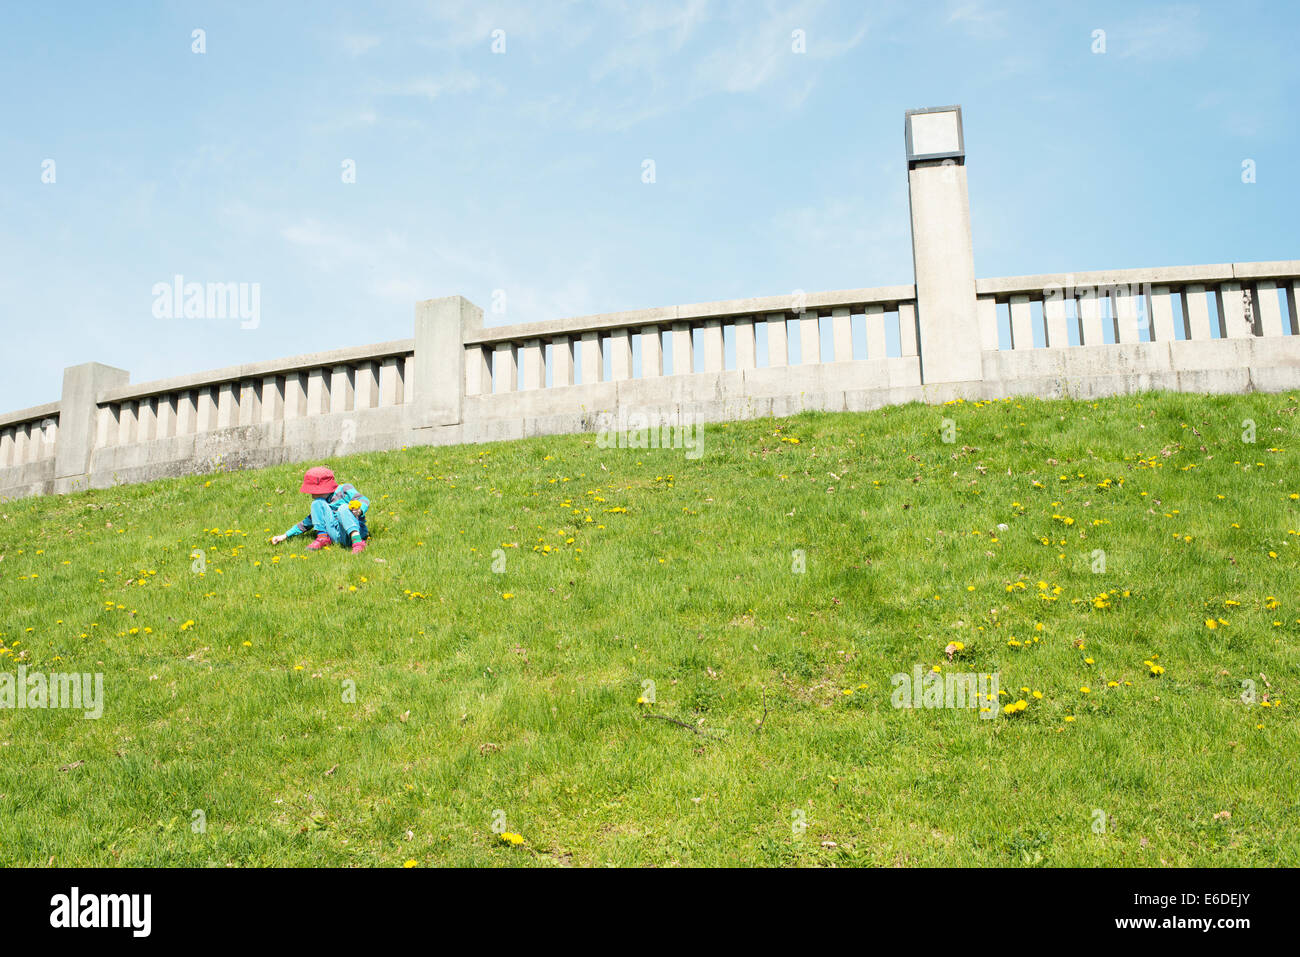 Young girl sitting on grass, picking flowers in park. Stock Photo